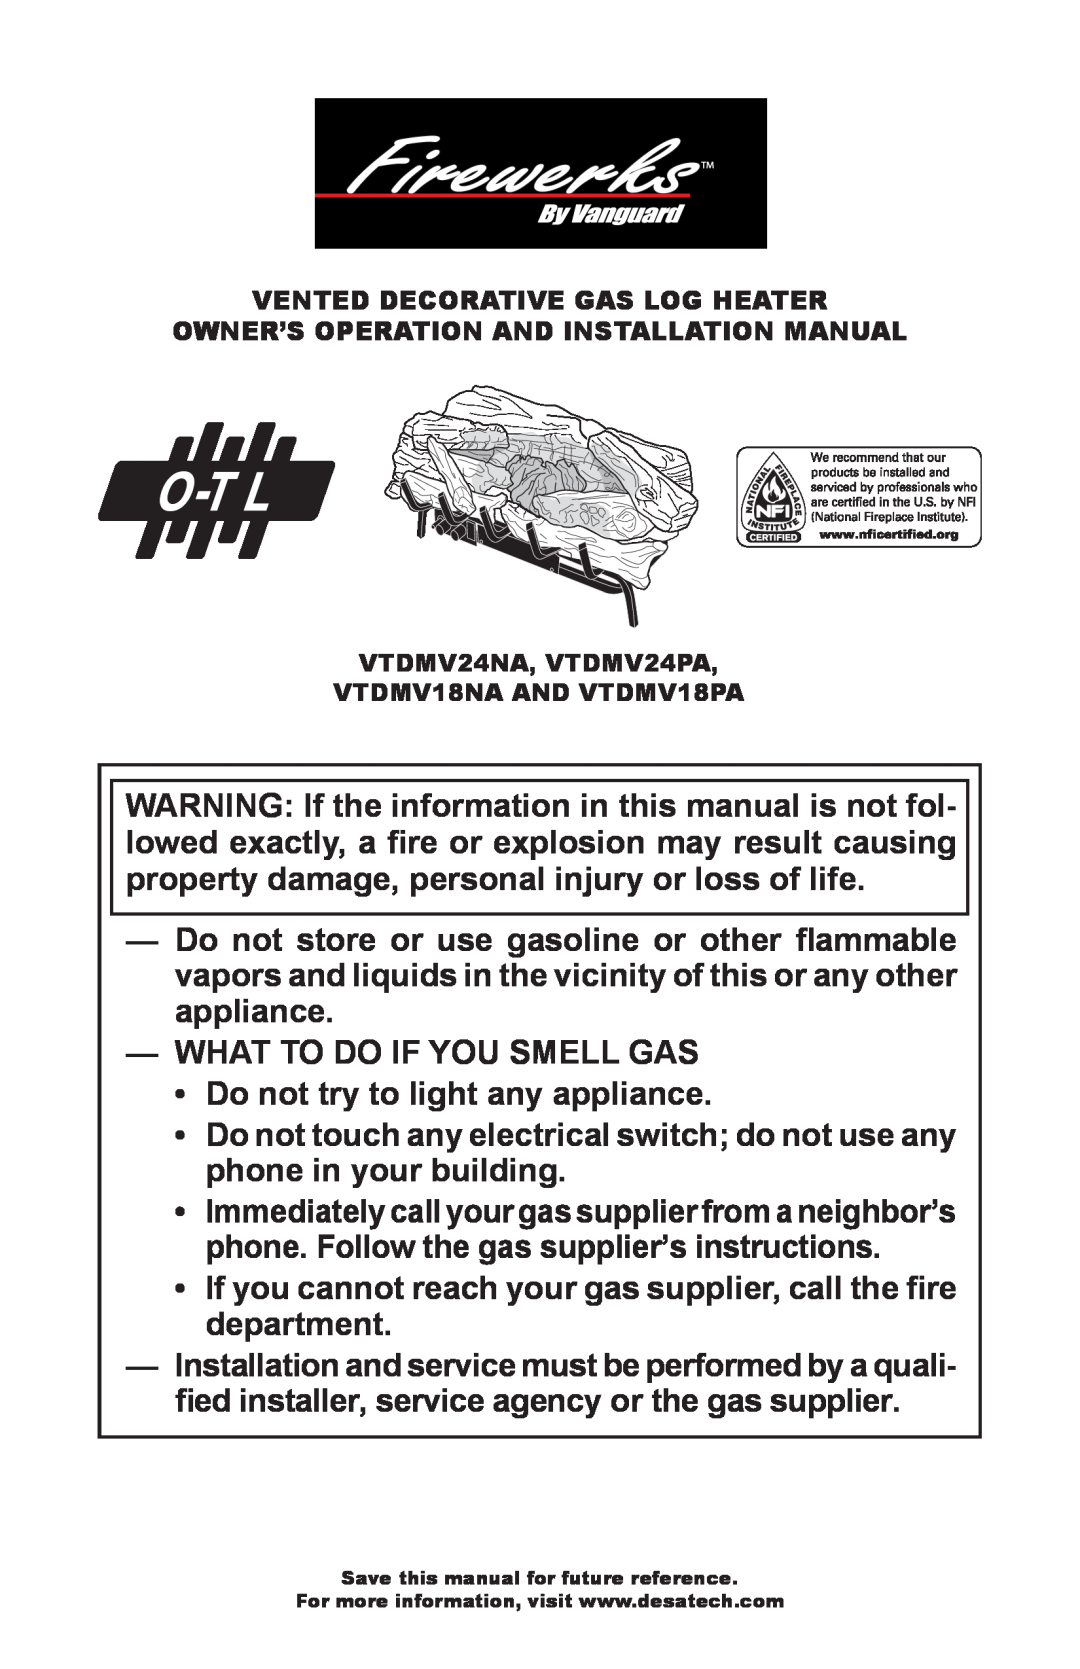 Desa VTDMV24NA, VTDMV24PA, VTDMV18PA, VTDMV18NA installation manual What To Do If You Smell Gas 